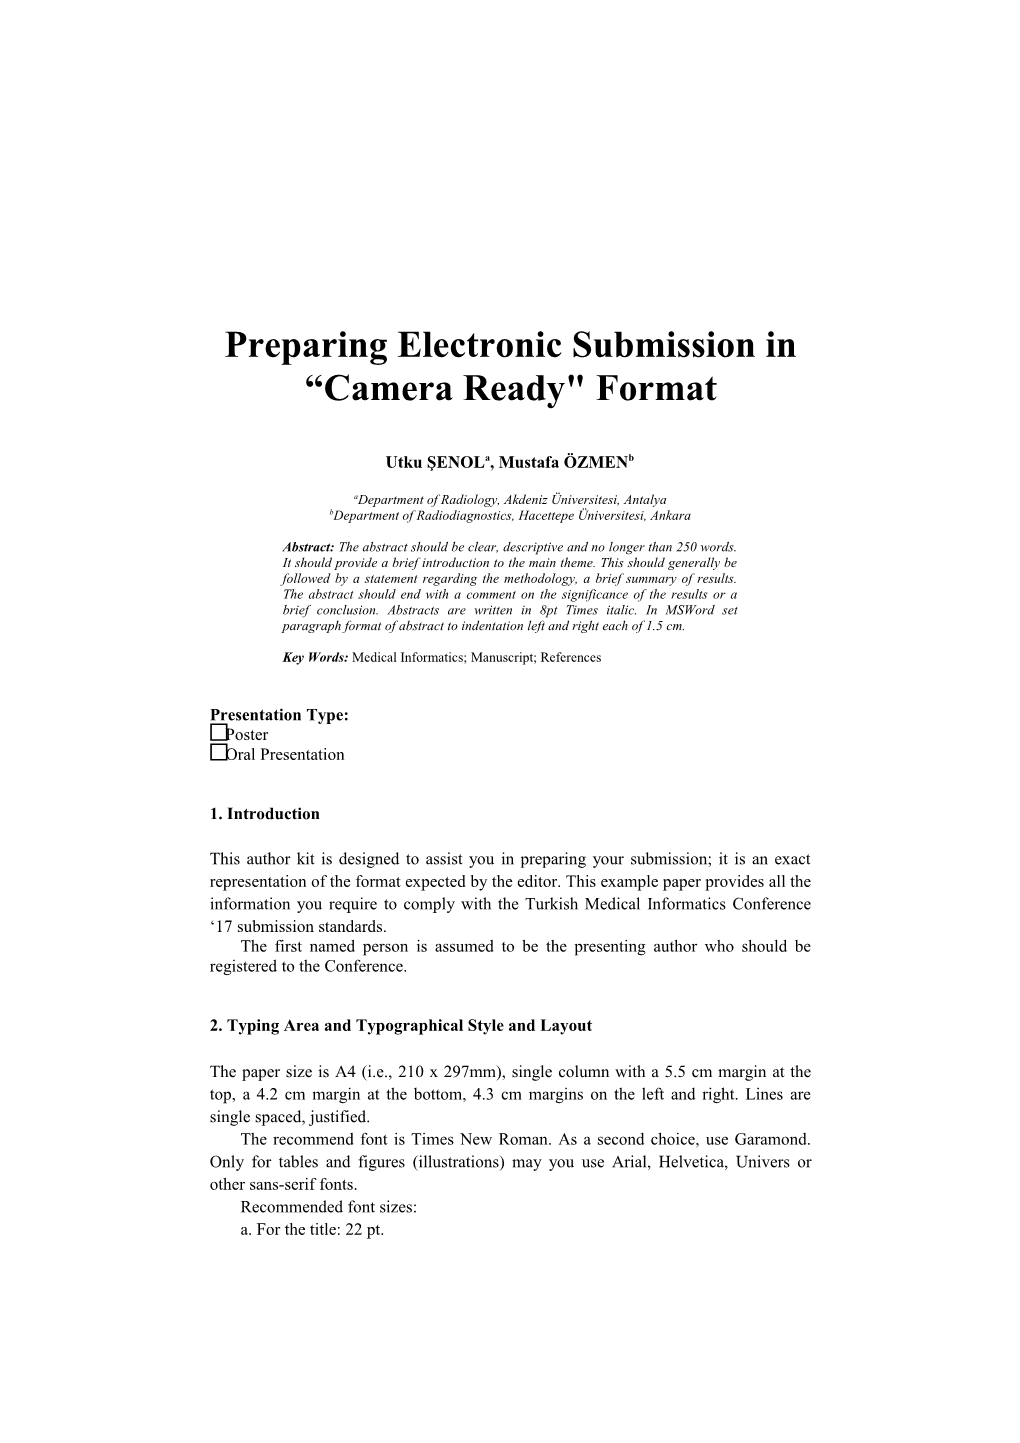 Preparing Electronic Submission in Camera Ready Format